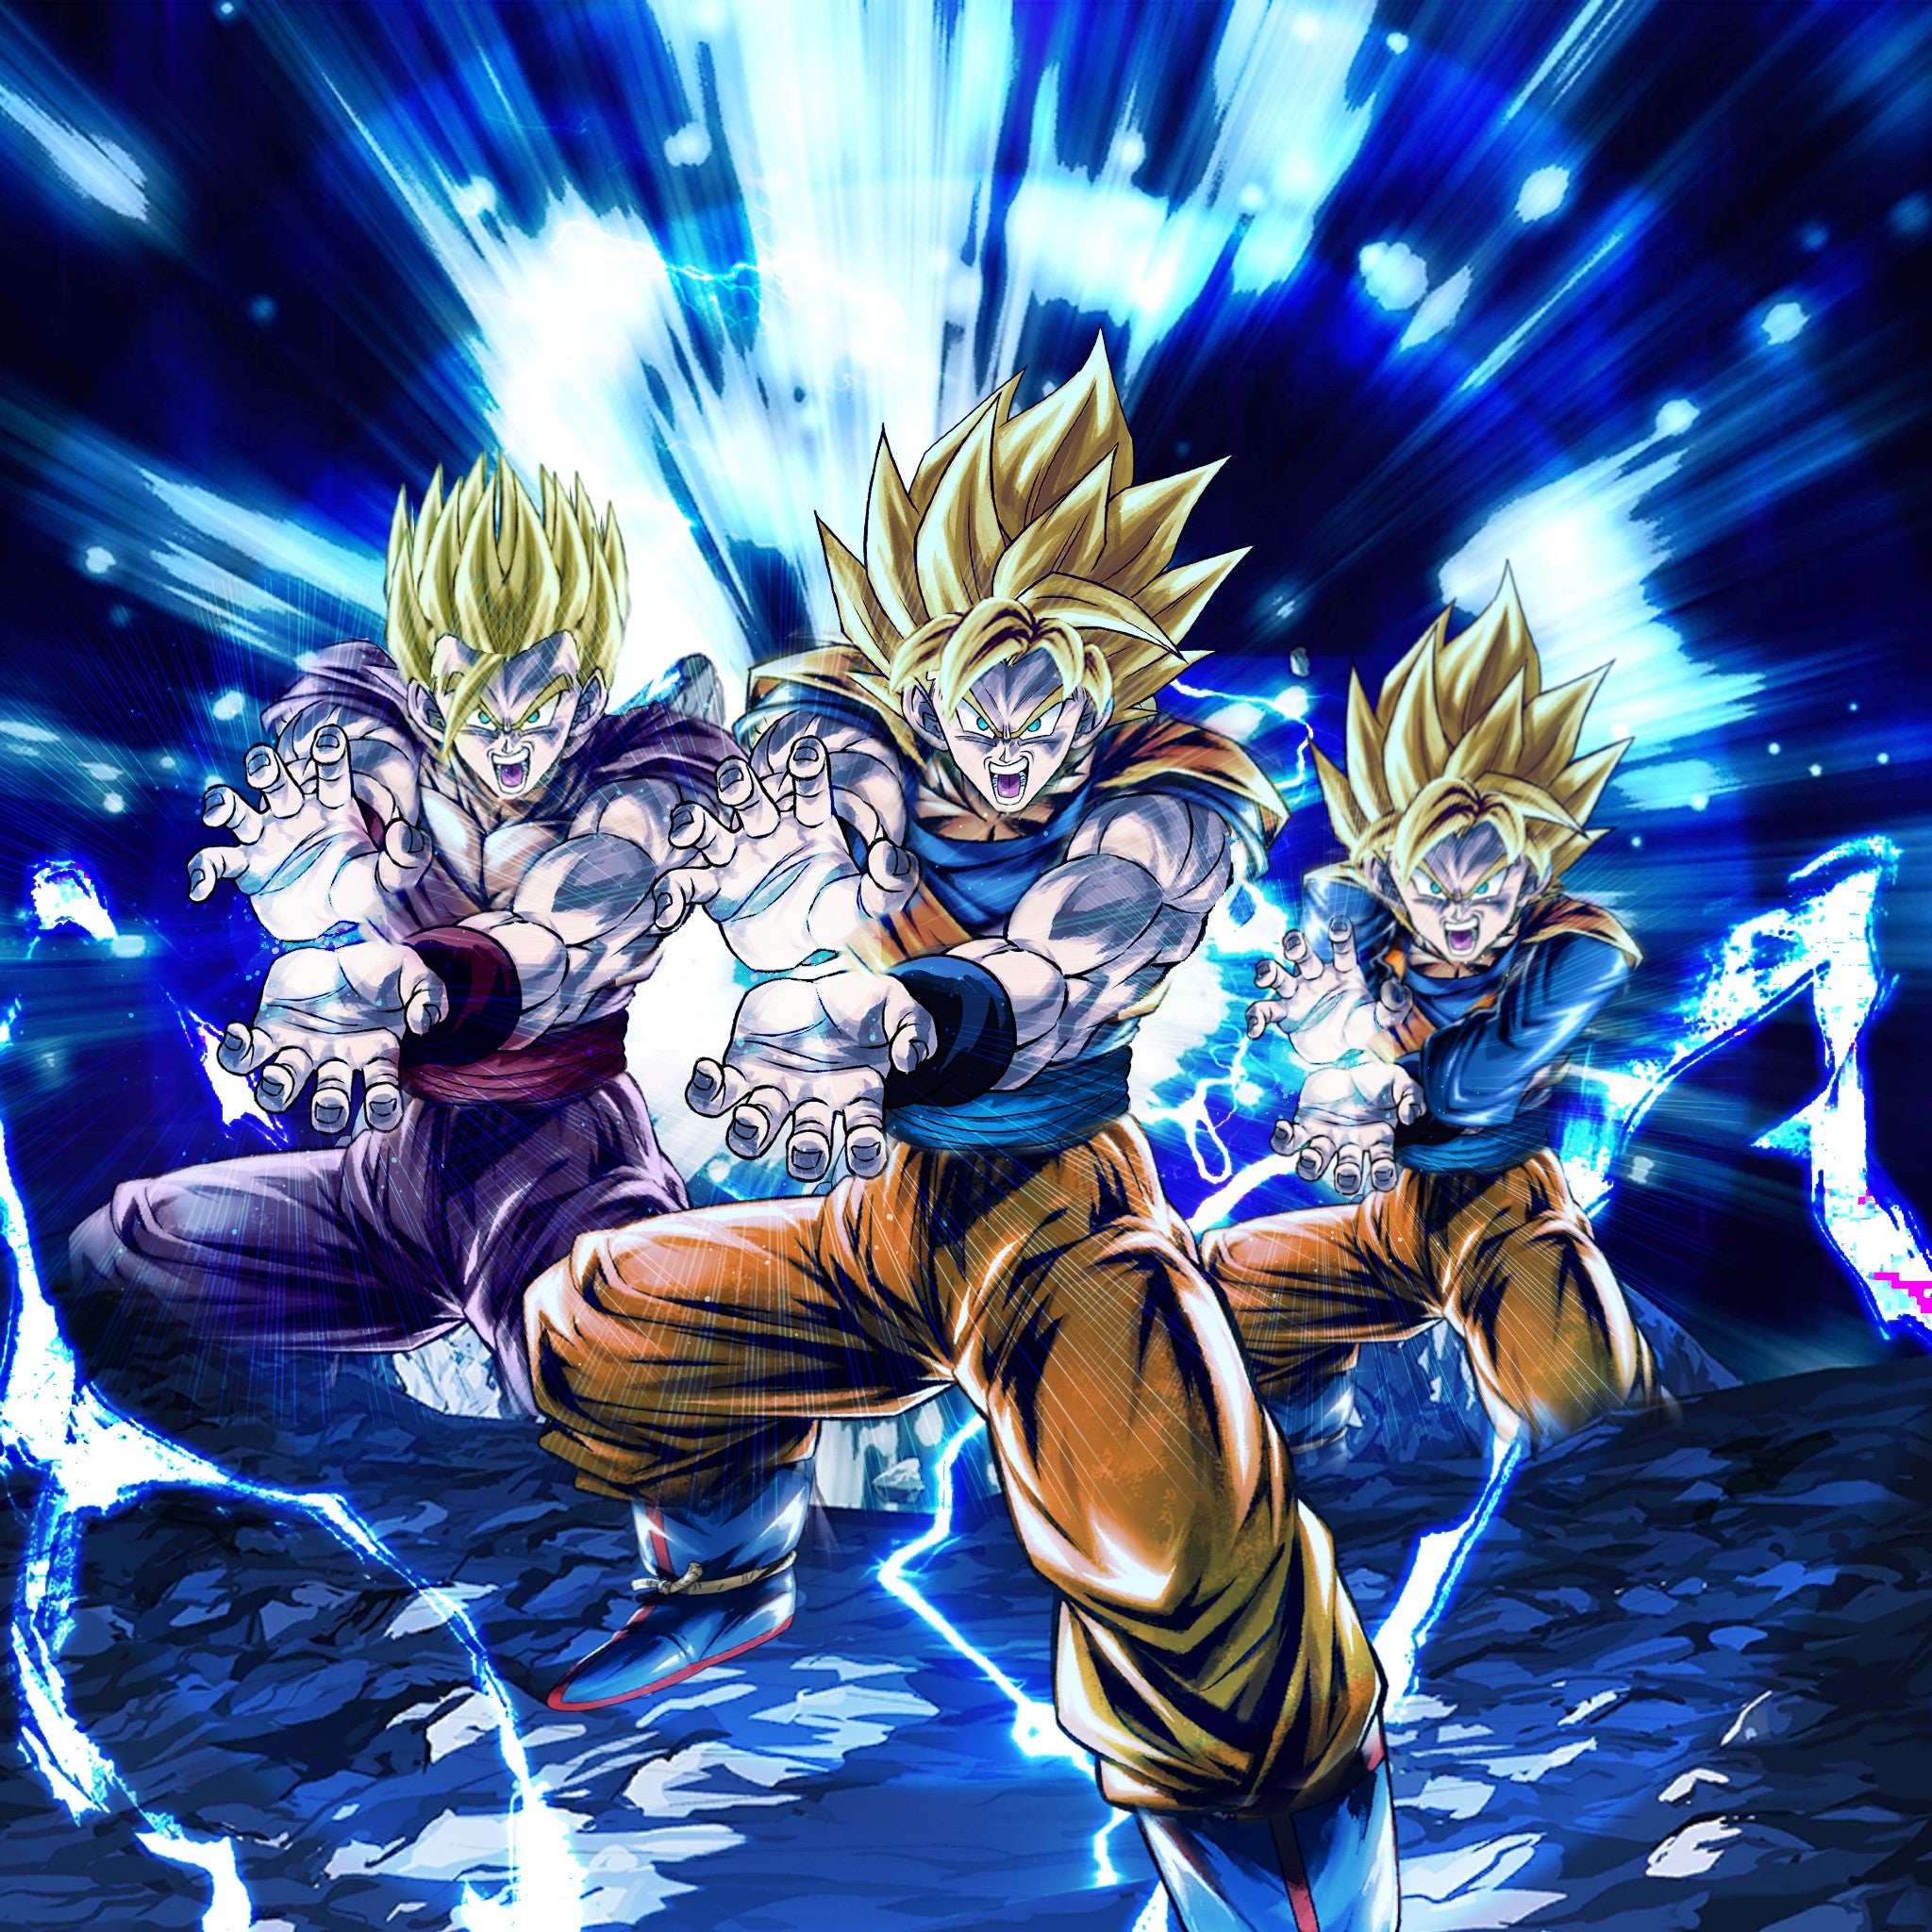 Hey guys, for my final edit of the year, I wanted to make the Family Kamehameha, because for me, this reddit has gone beyond a community and grown to be more of